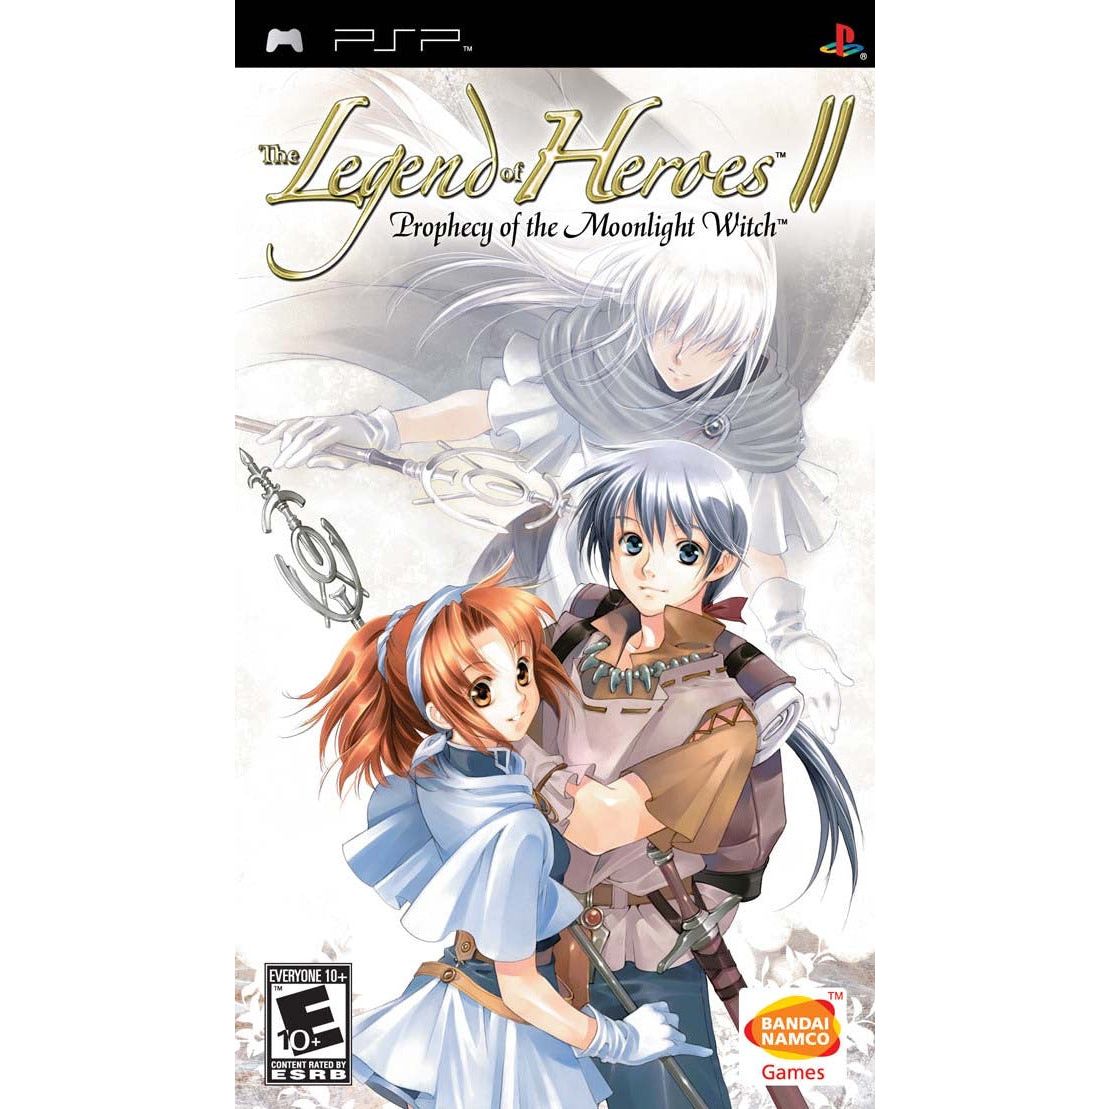 PSP - The Legend of Heroes II Prophecy of the Moonlight Witch (In Case)